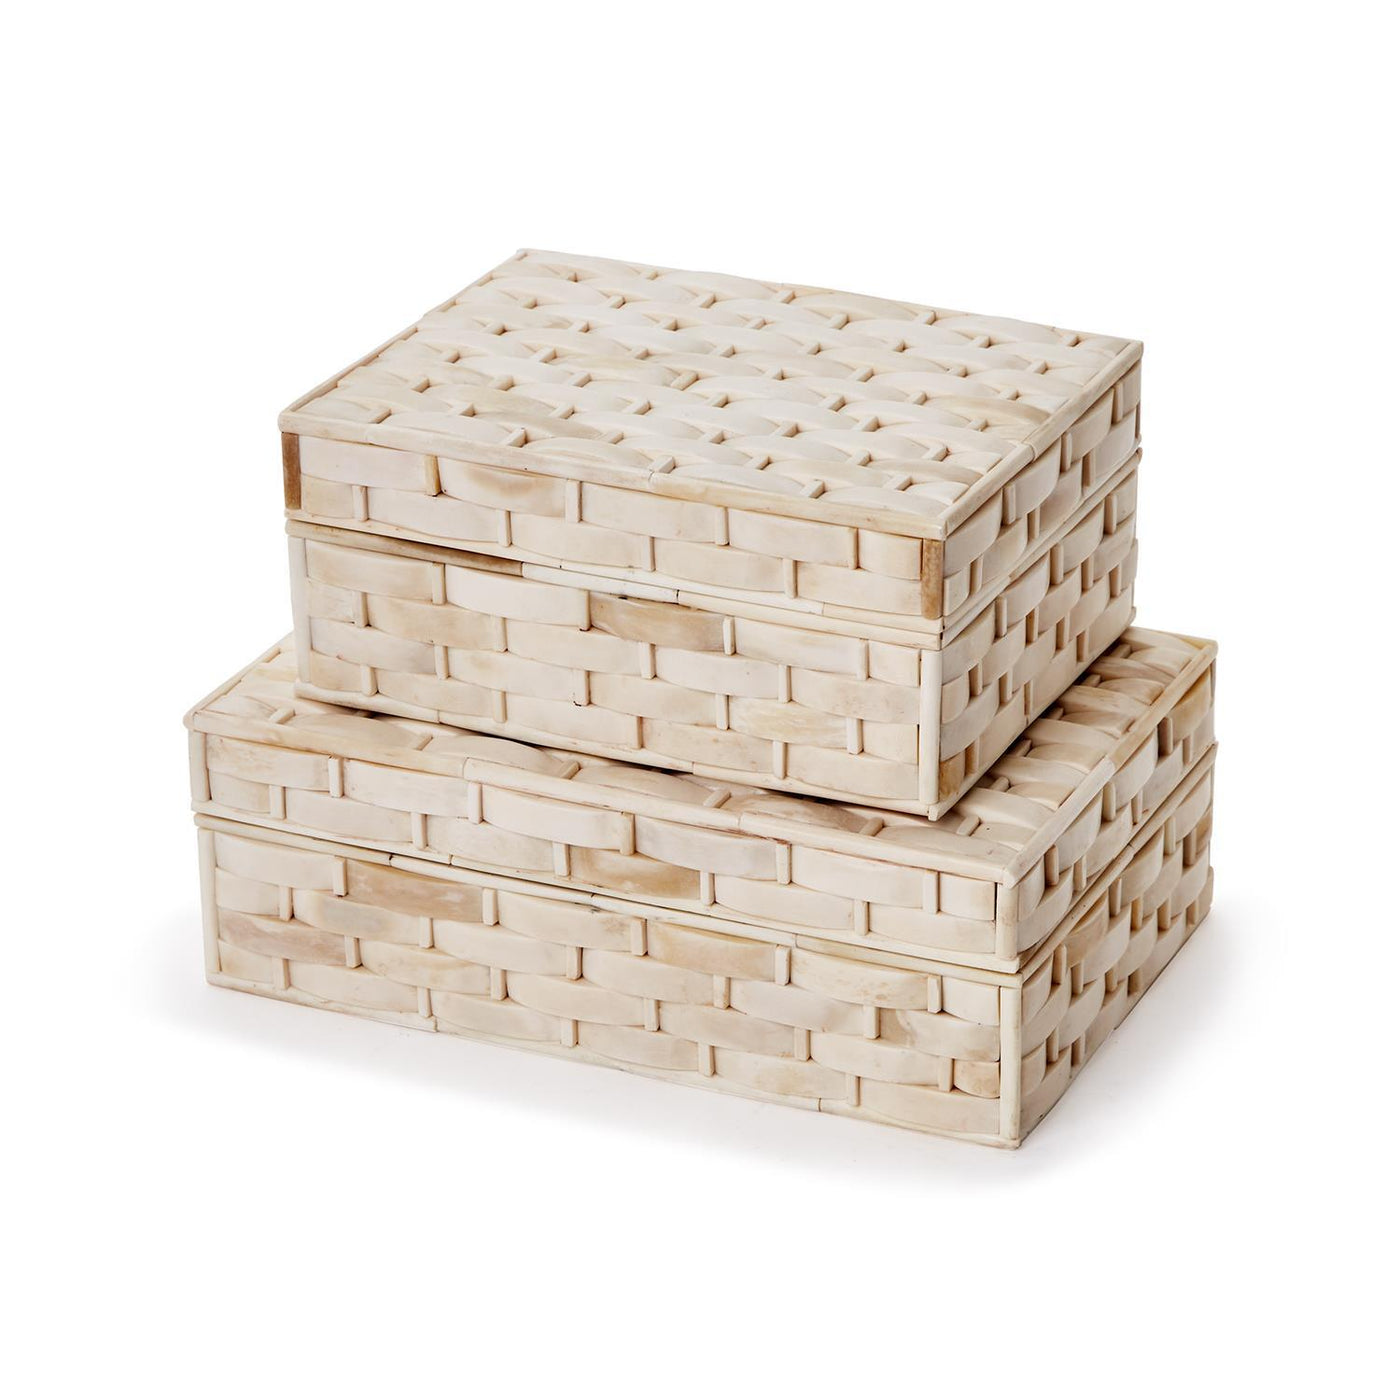 BOX BASKETWEAVE BONE (Available in 2 Sizes)